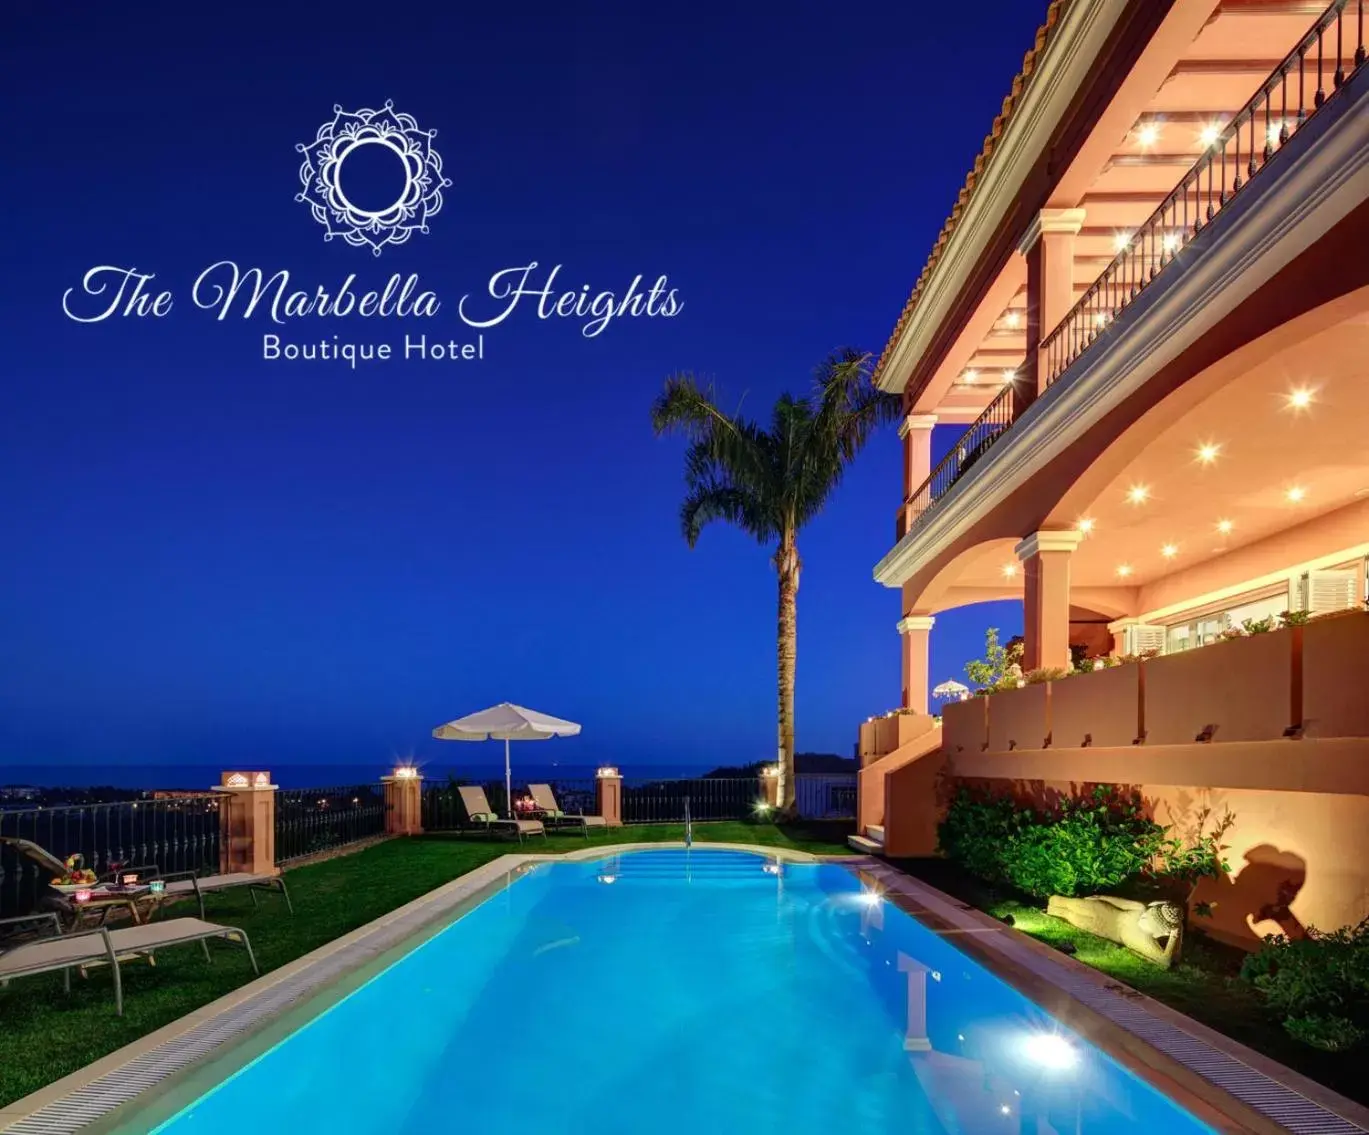 Property building, Swimming Pool in The Marbella Heights Boutique Hotel